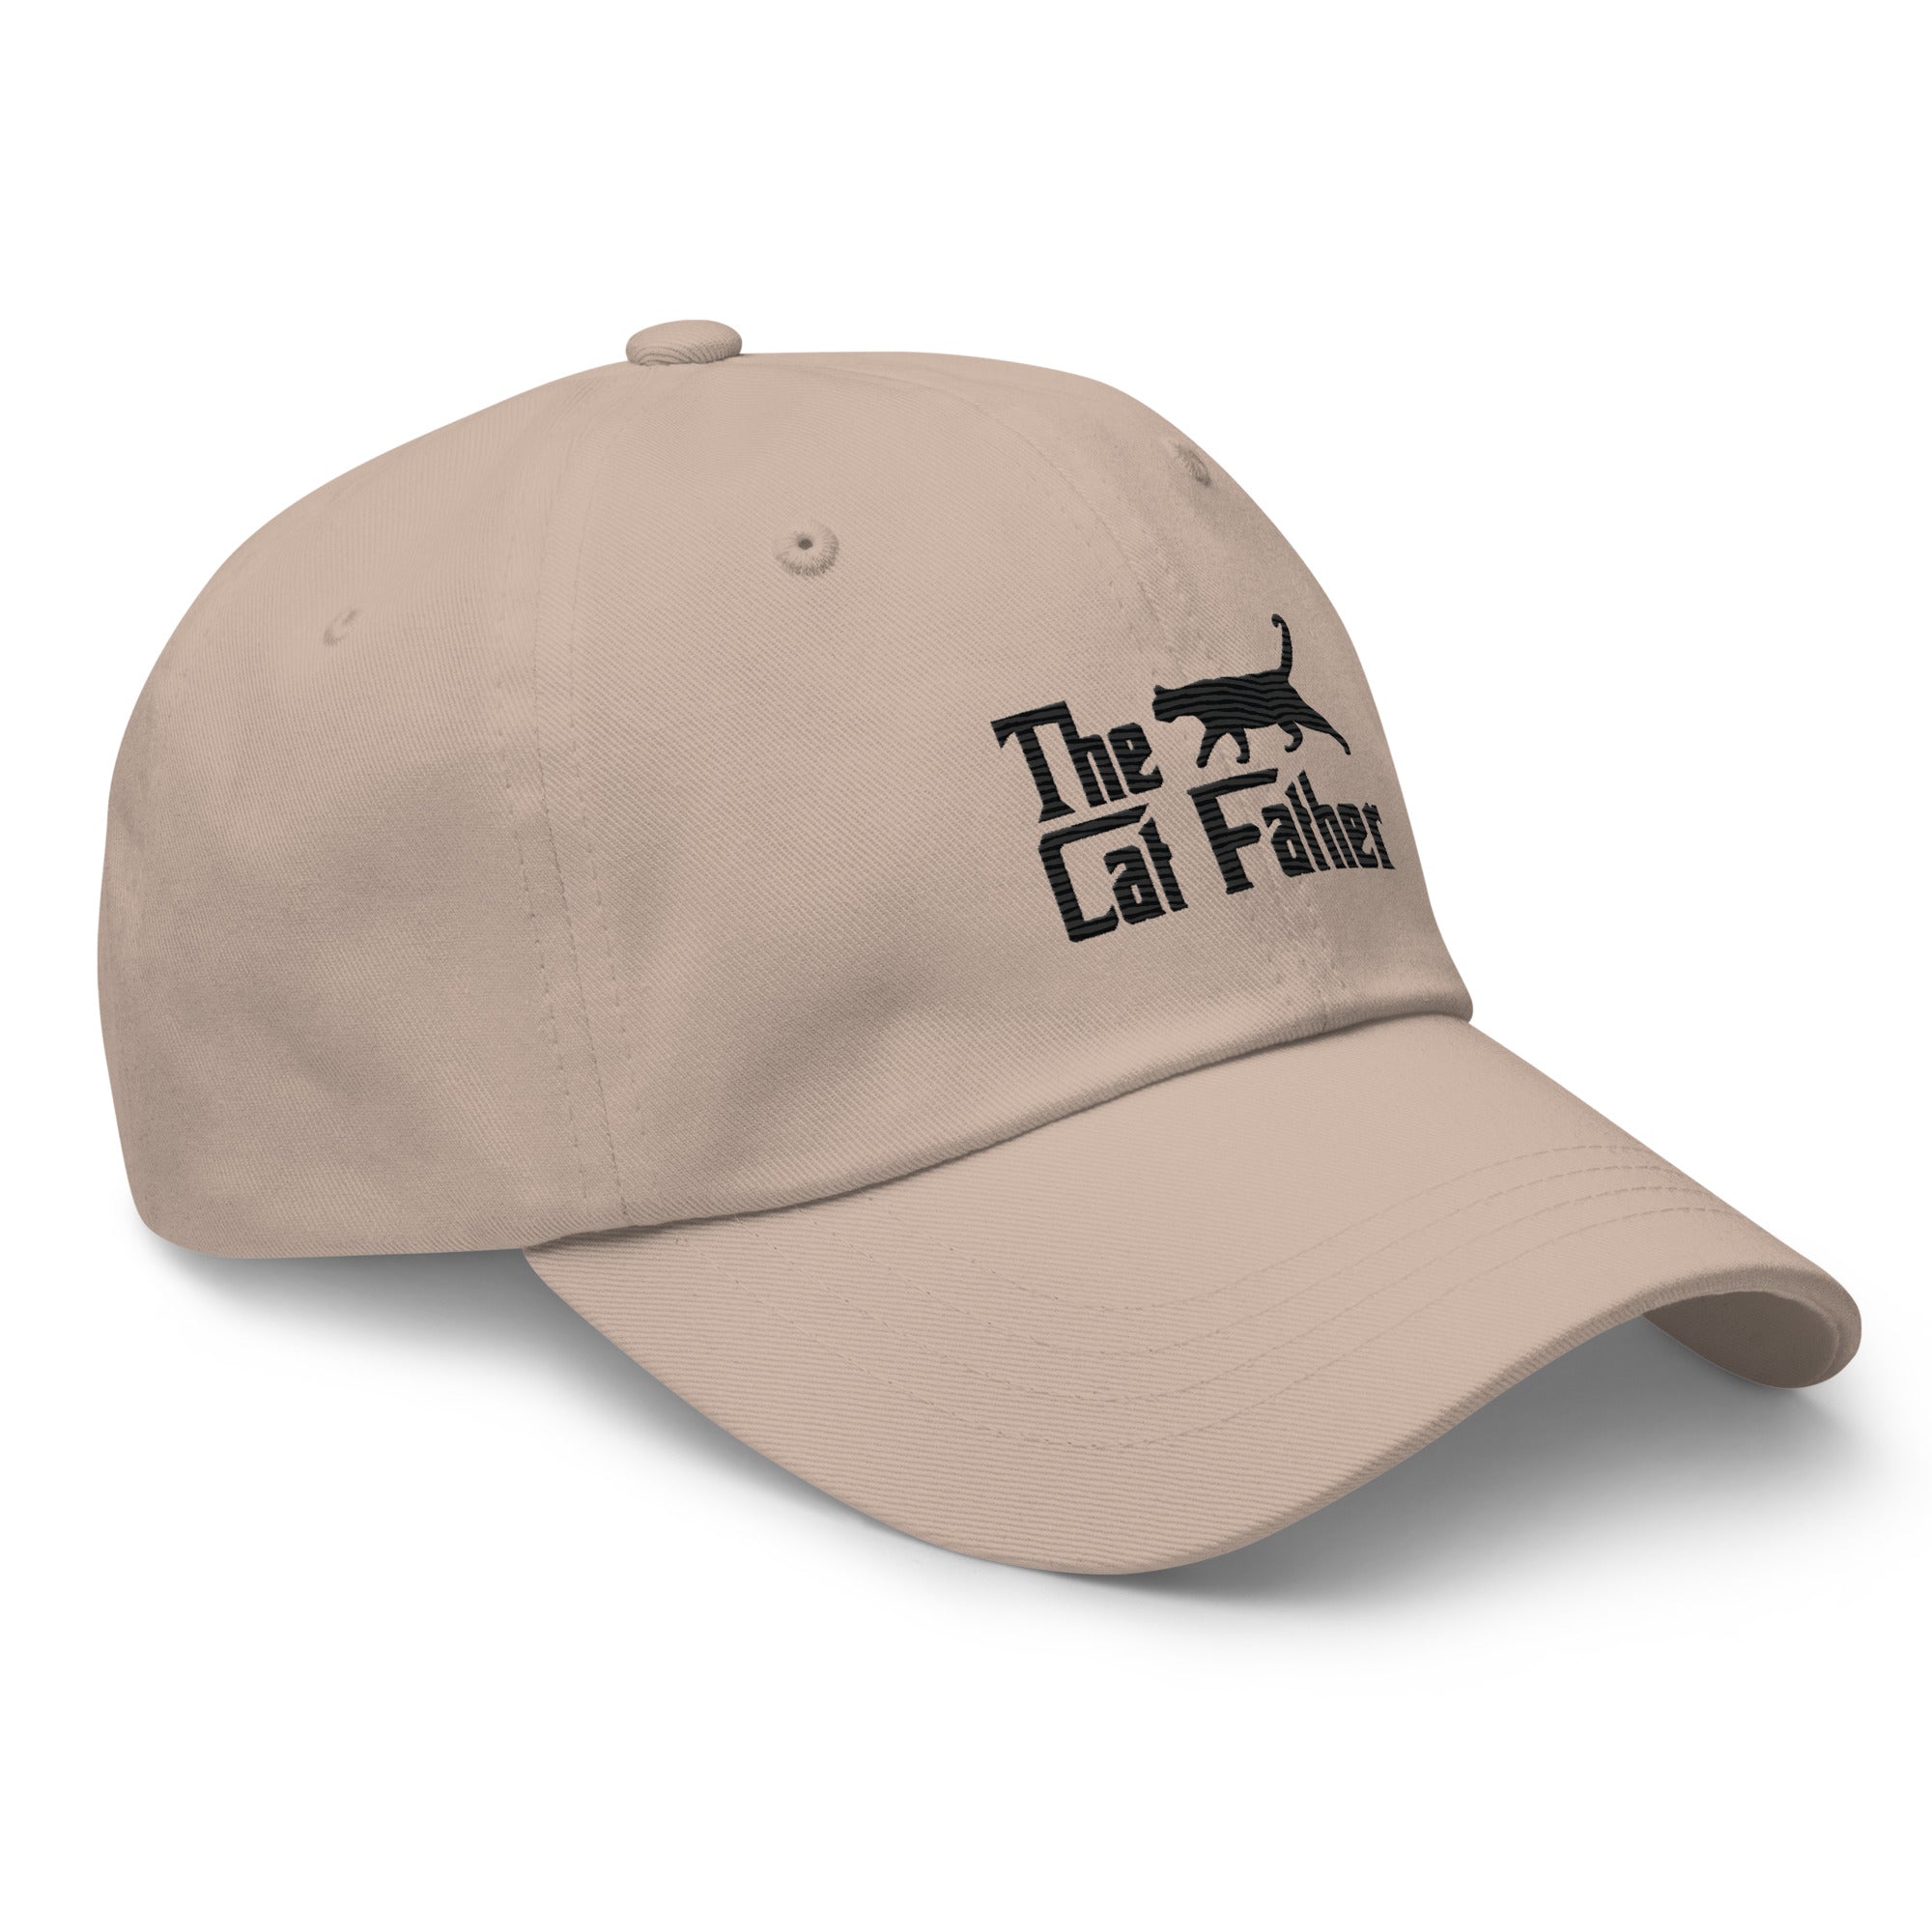 Hat | Cat Father